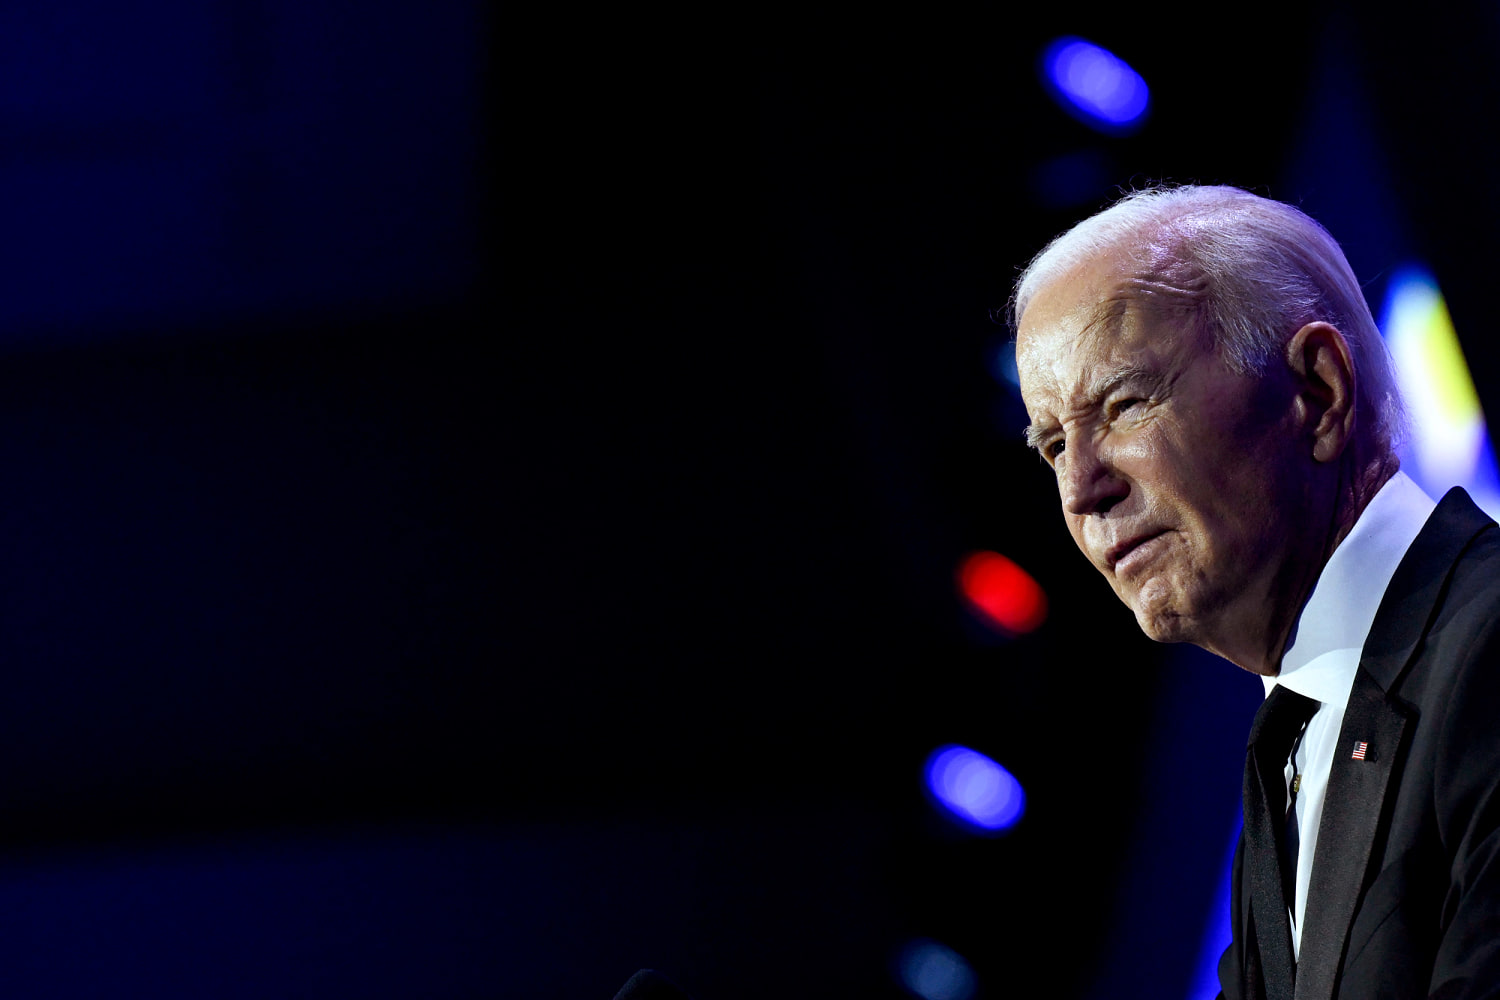 Biden drops out of 2024 race after weeks of pressure, endorses Harris